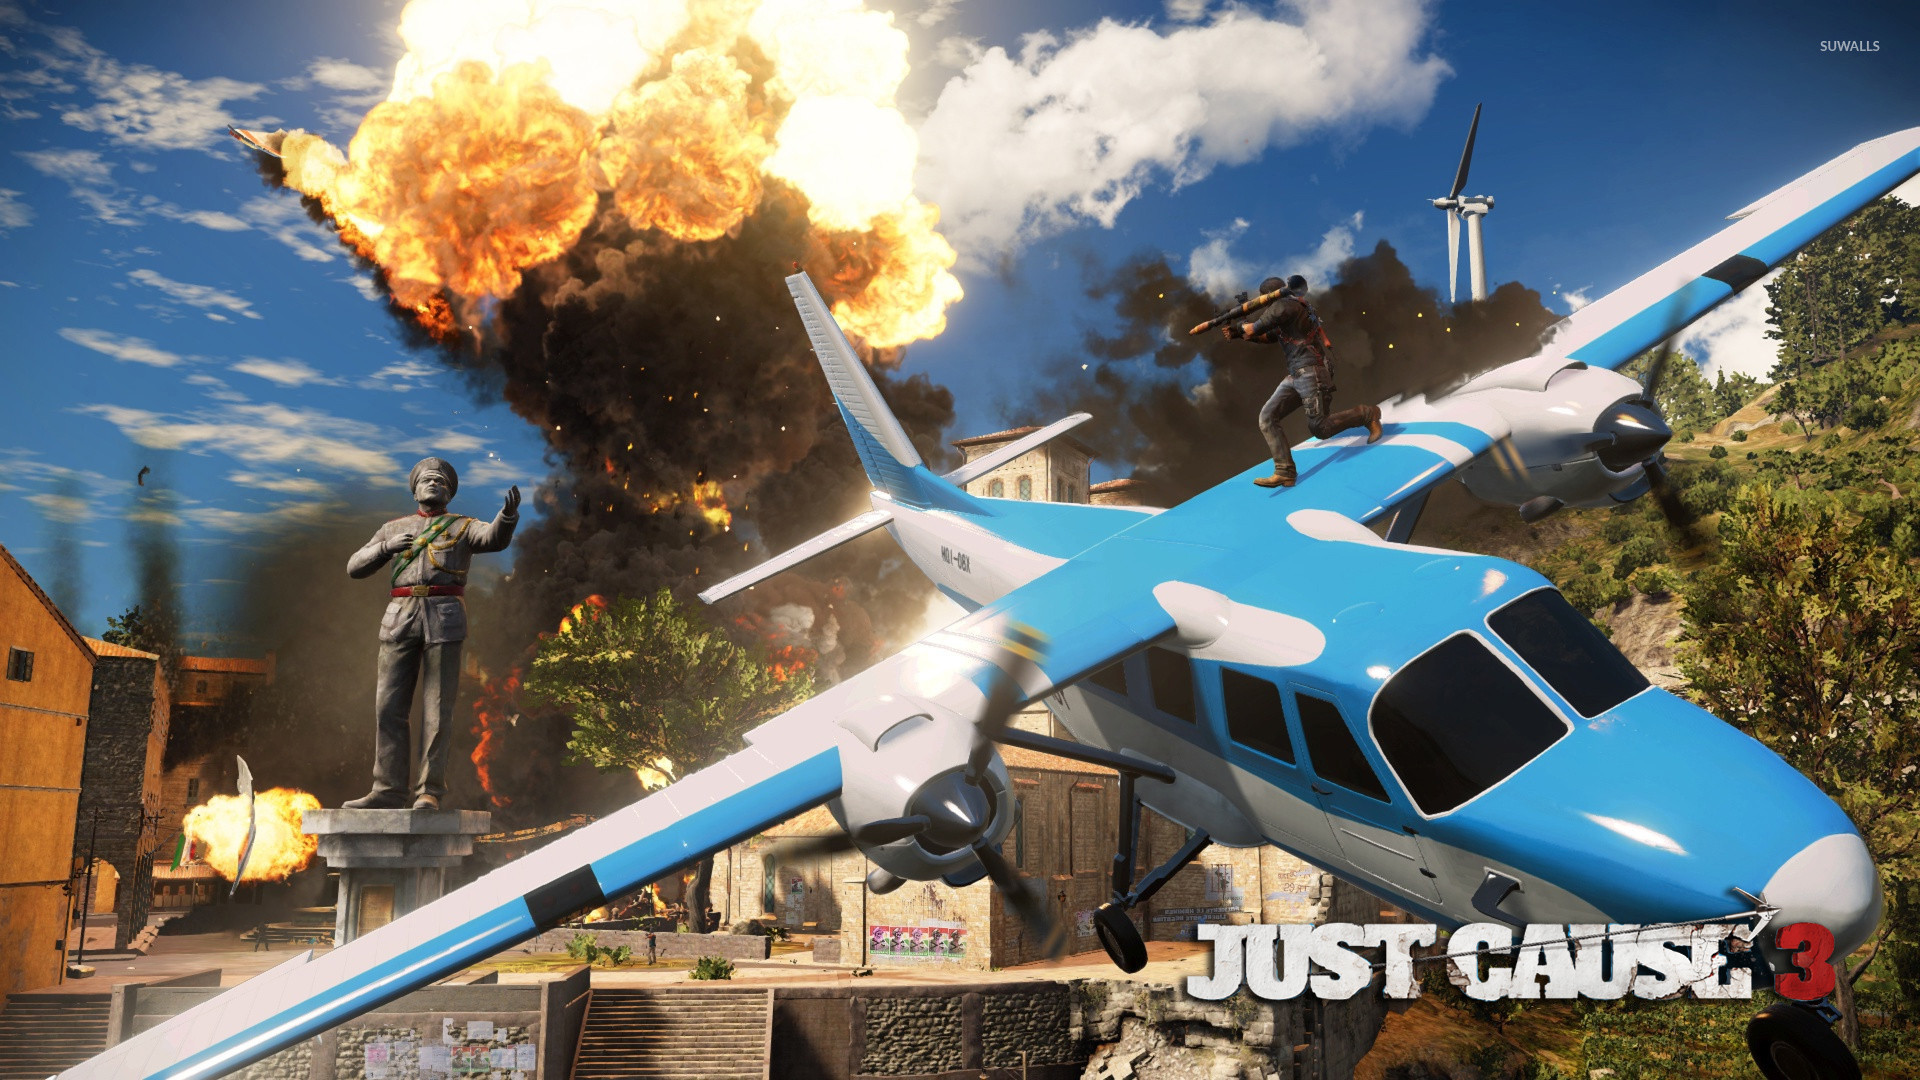 1920x1080 Rico Rodriguez on a small plane - Just Cause 3 wallpaper  jpg